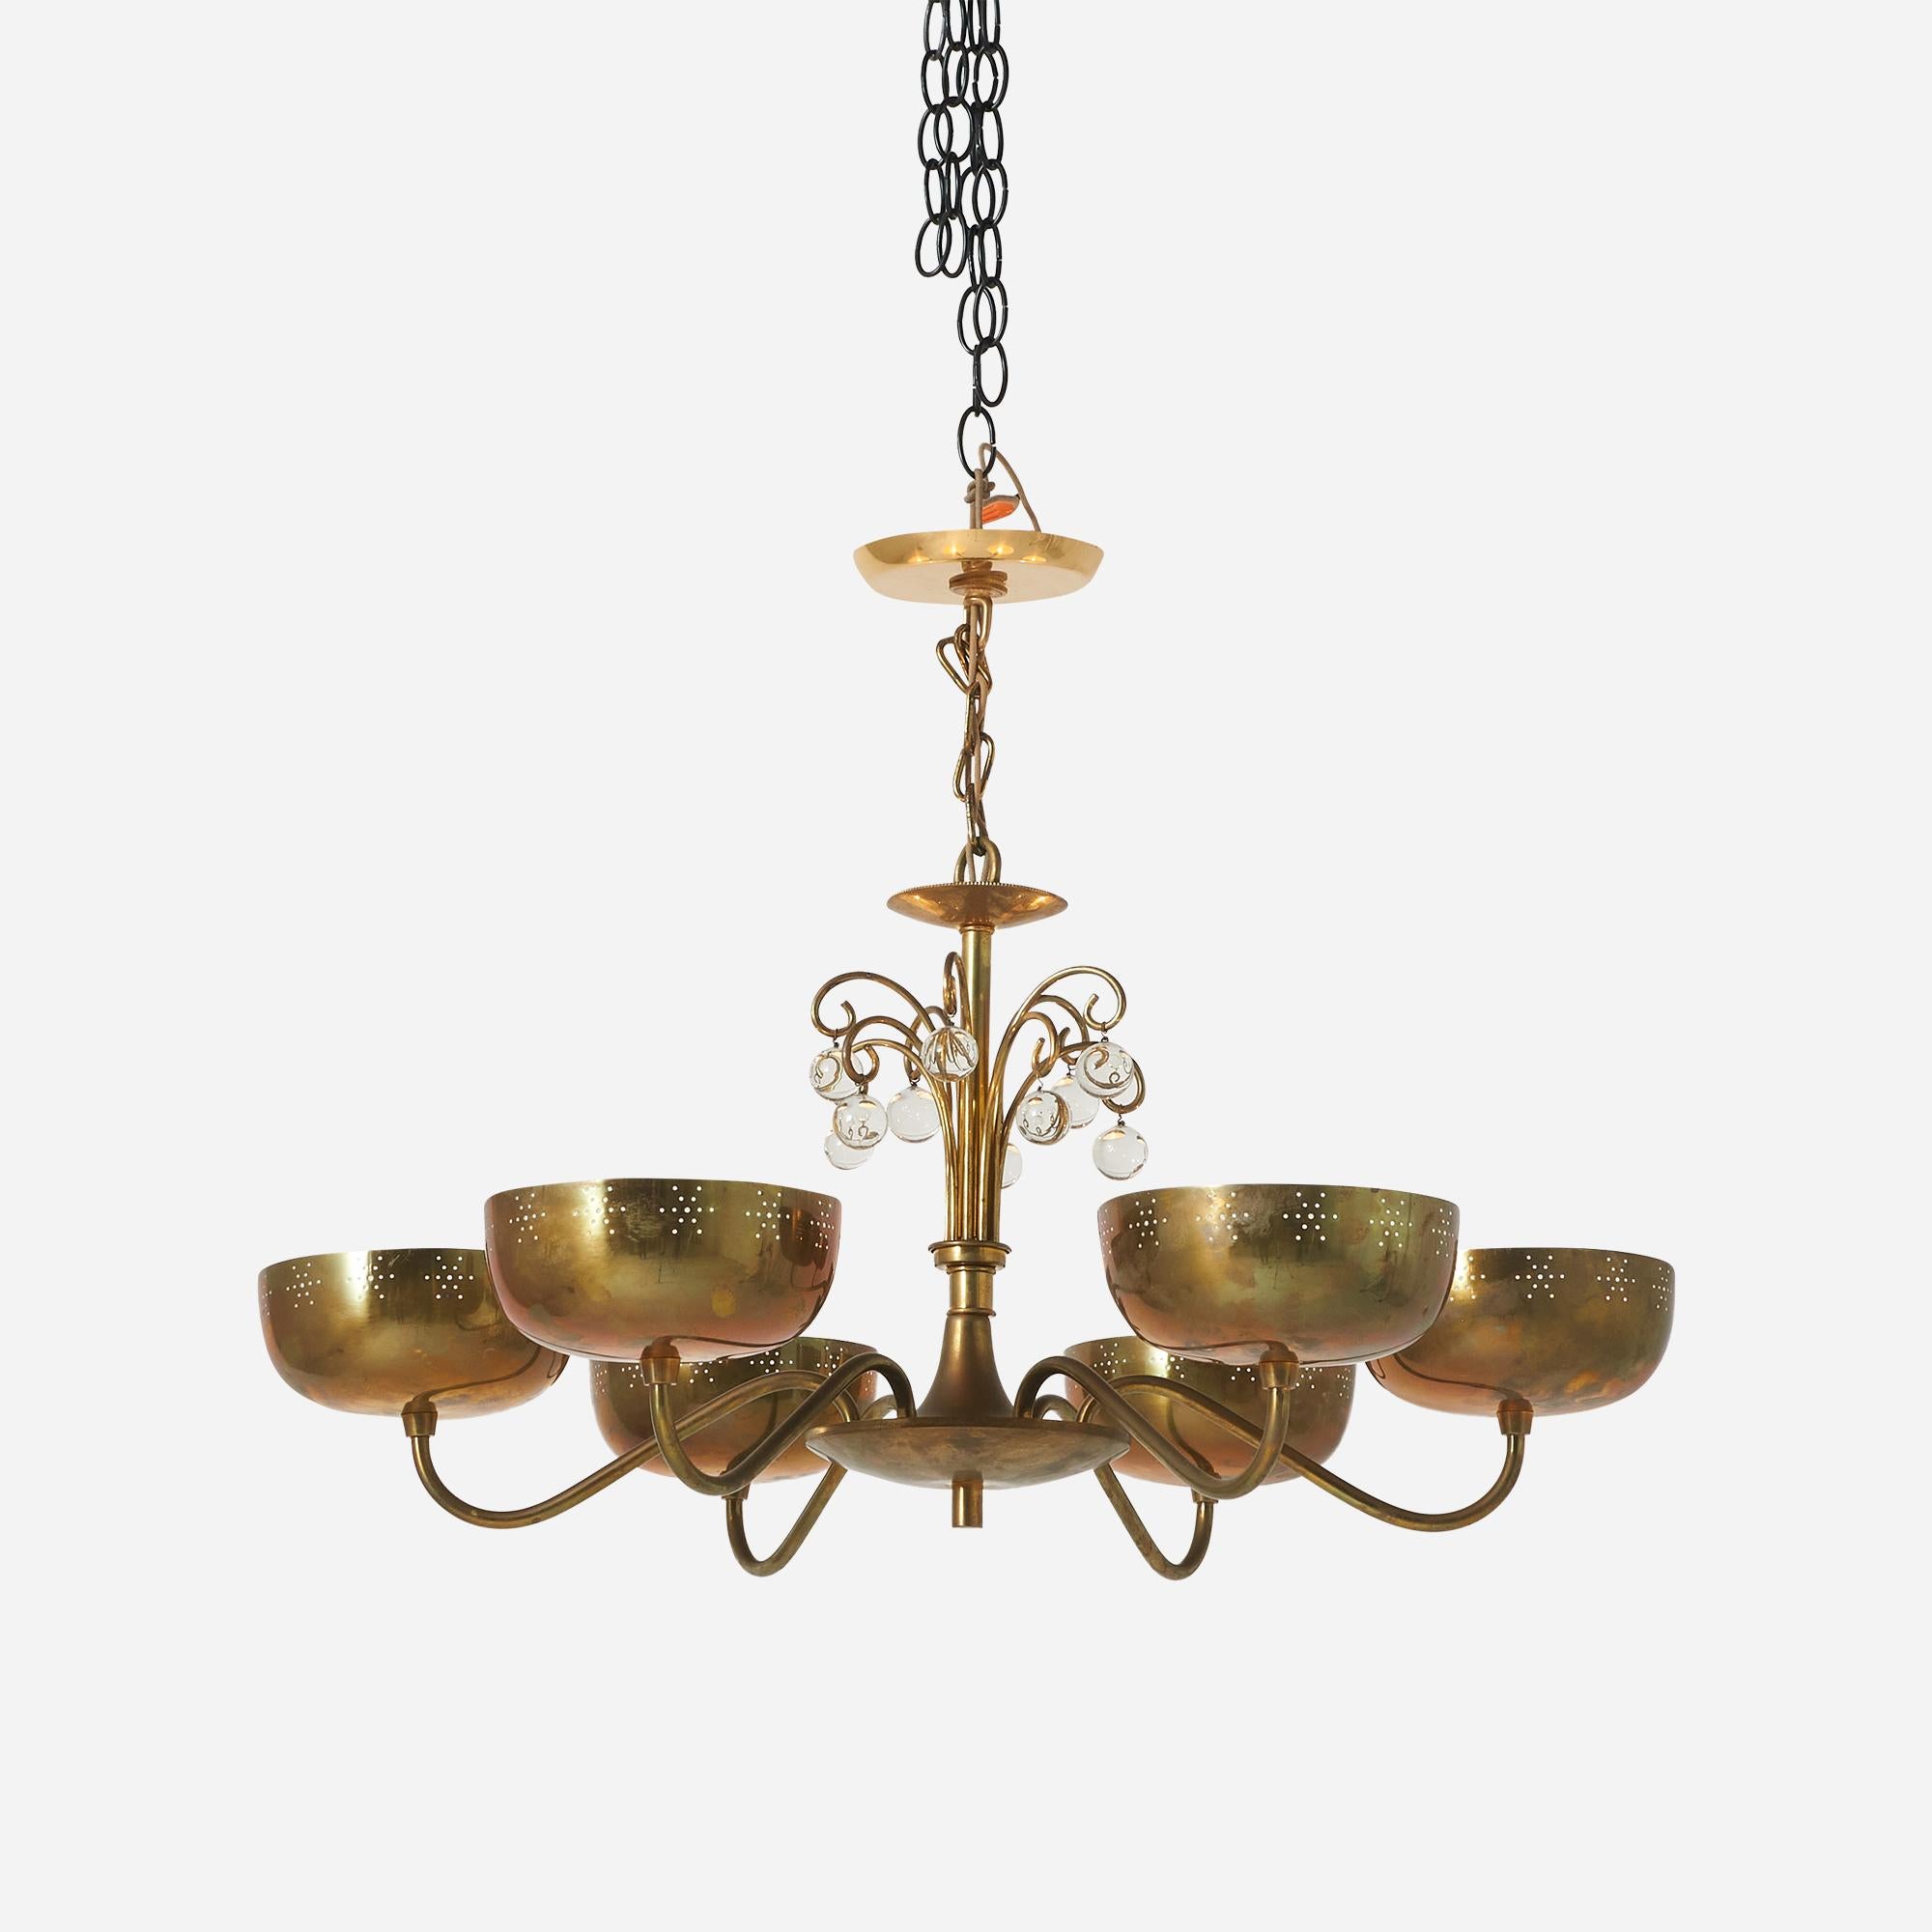 A brass chandelier with 10 hanging crystal orbs and 6 cupped arms. Attributed to Lightolier and creation attributed to Paavo Tynell.